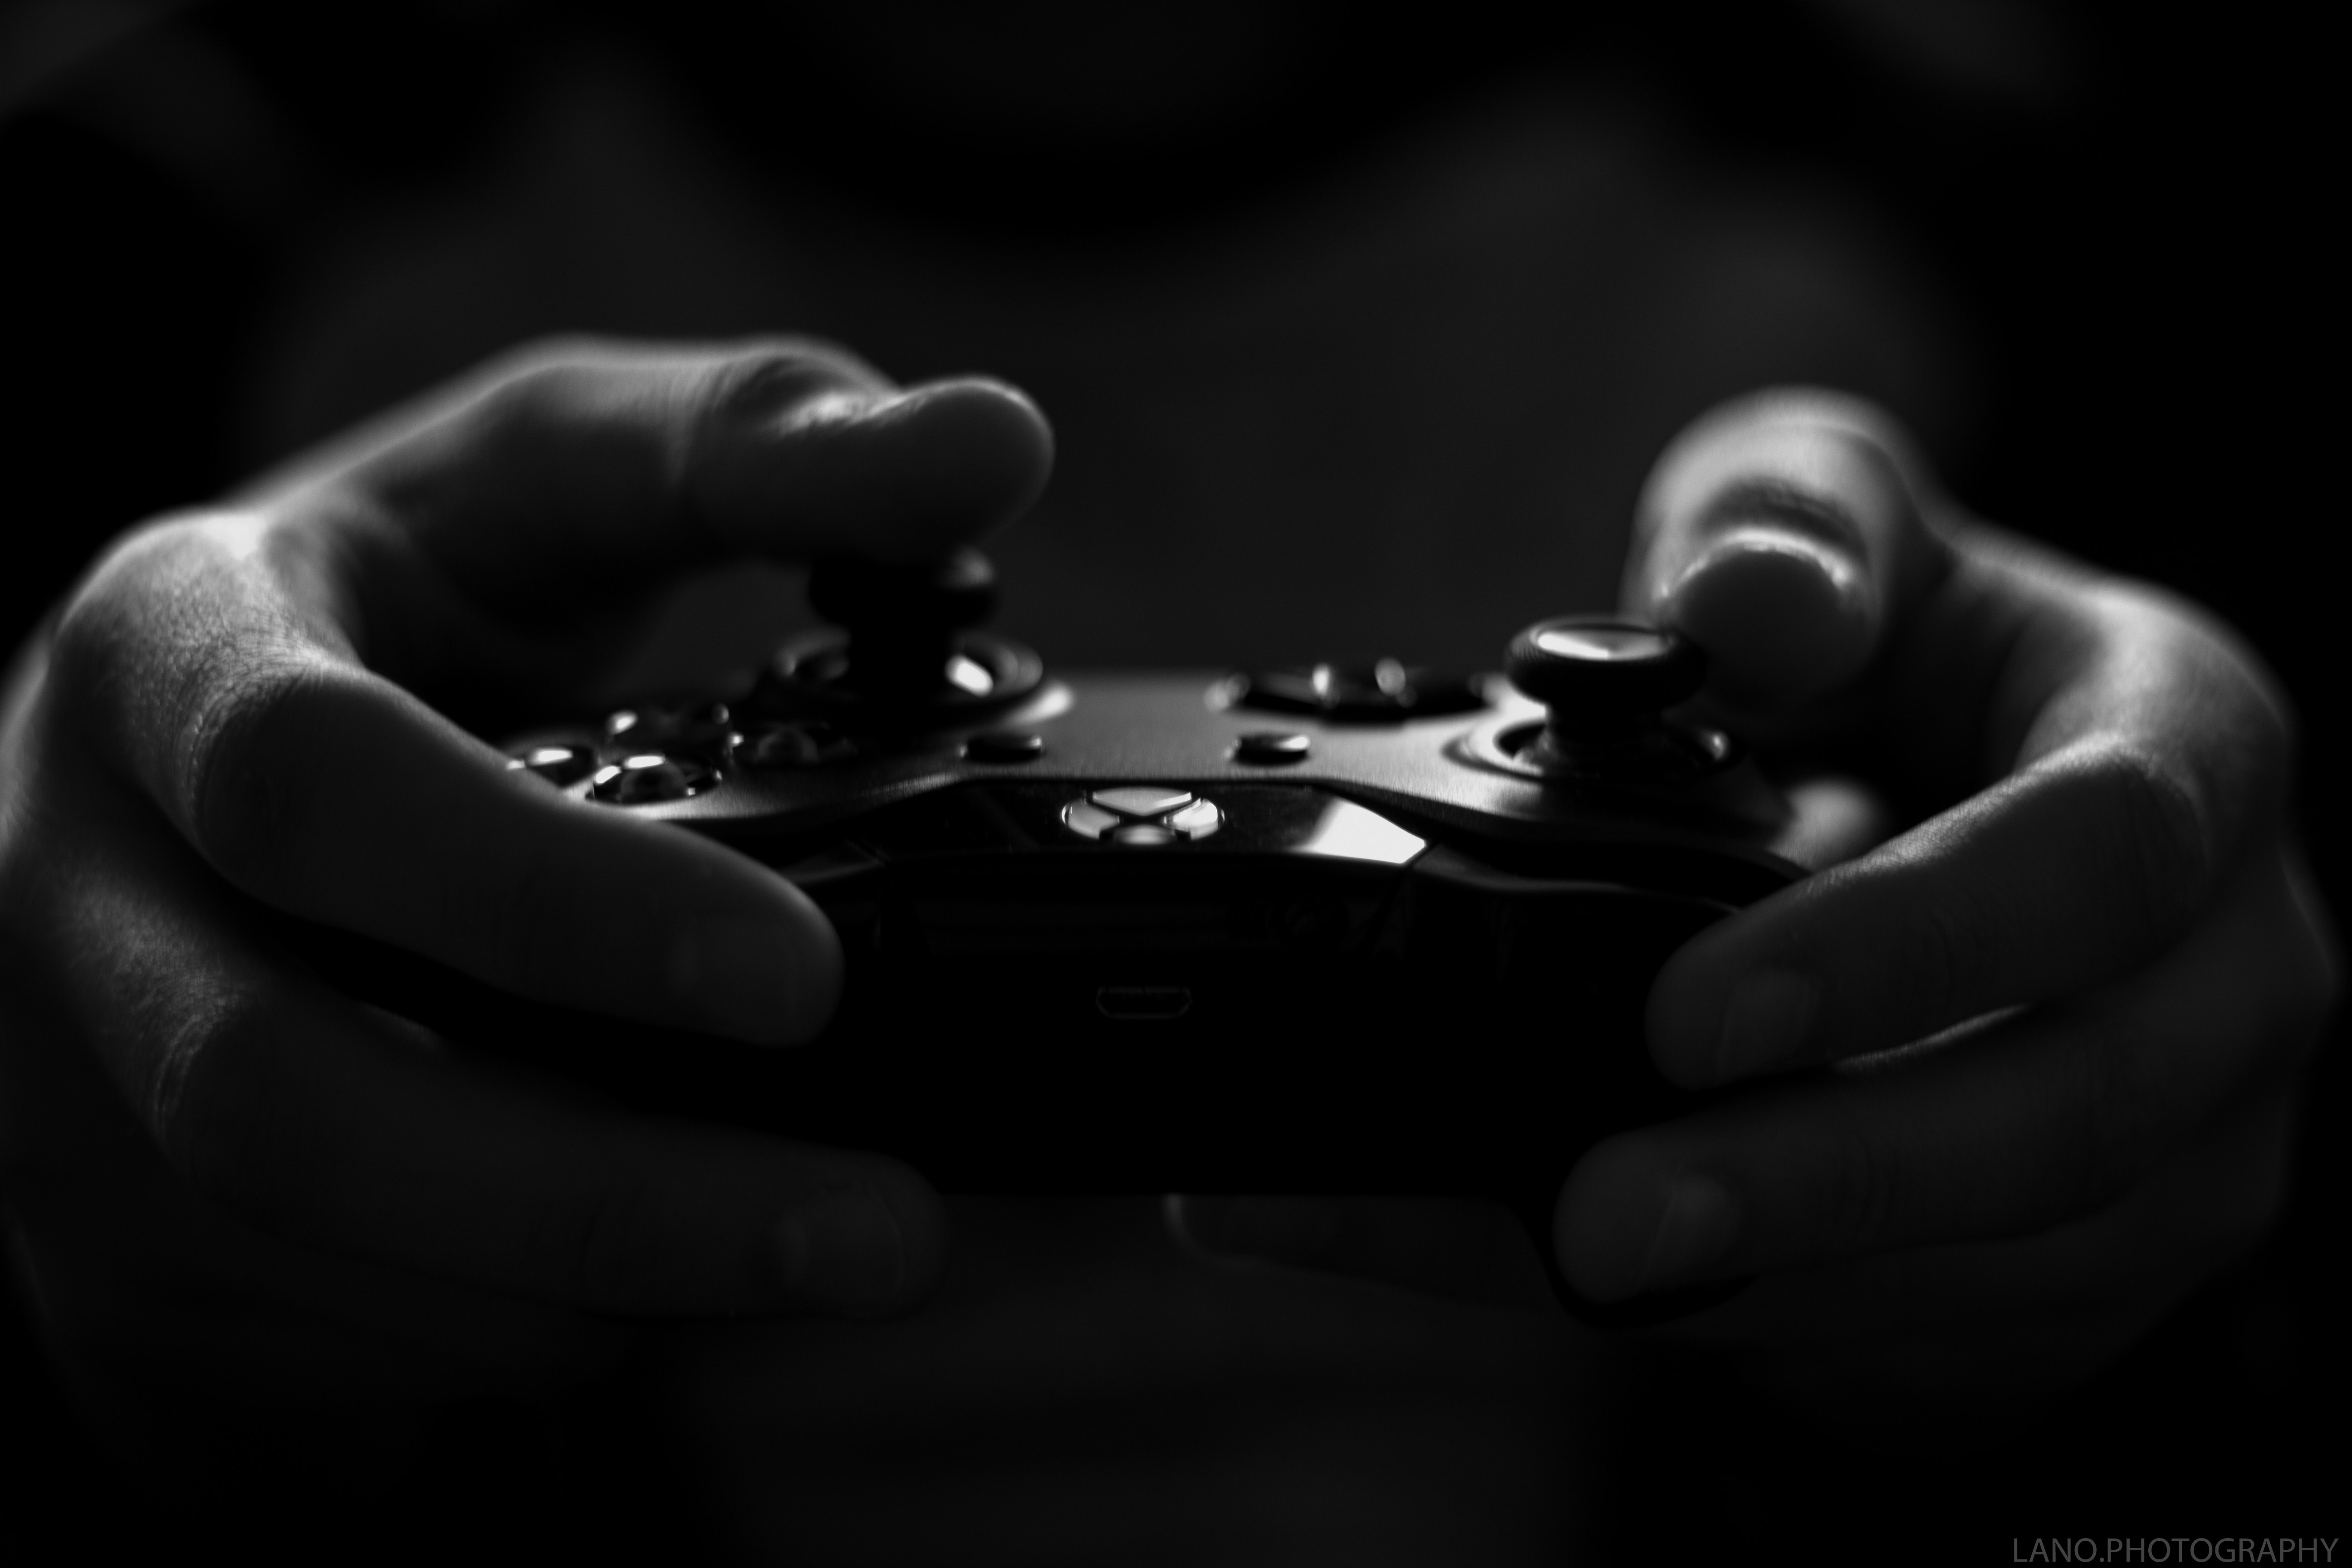 Gray scale image of xbox game controller photo